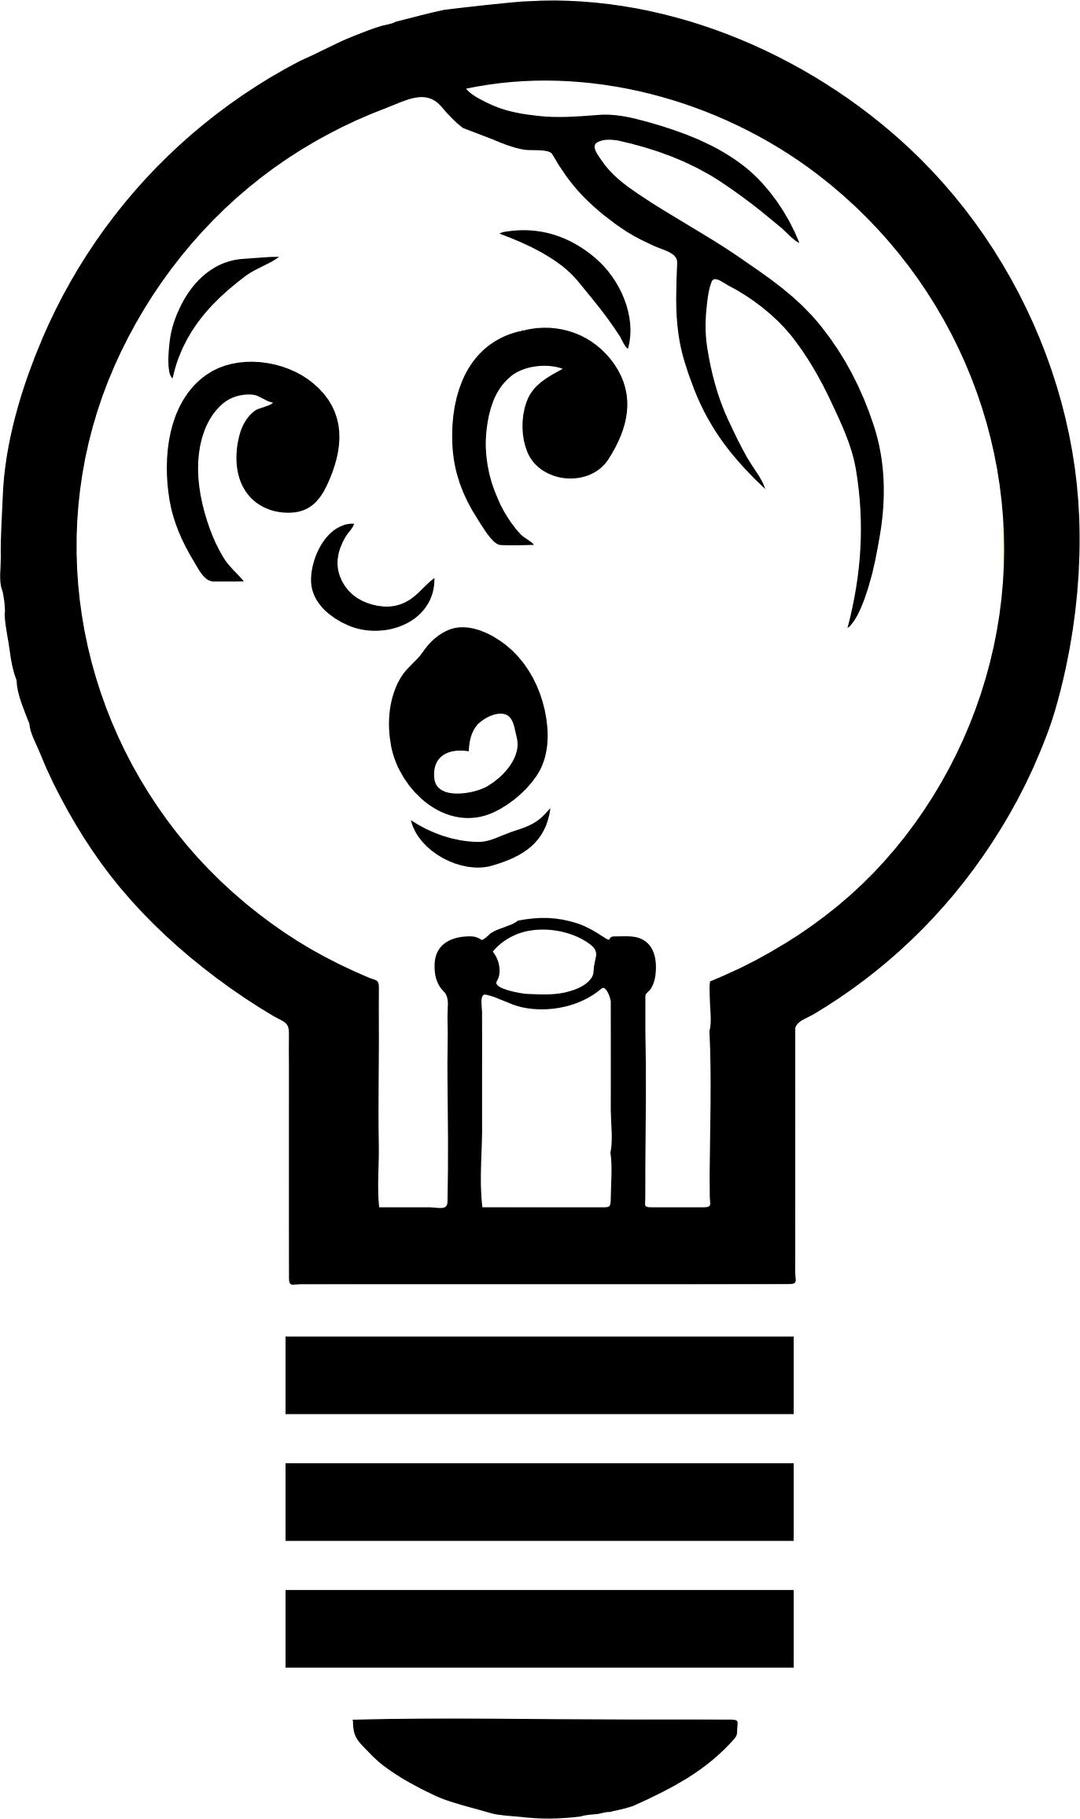 Anthropomorphic Light Bulb Silhouette png transparent